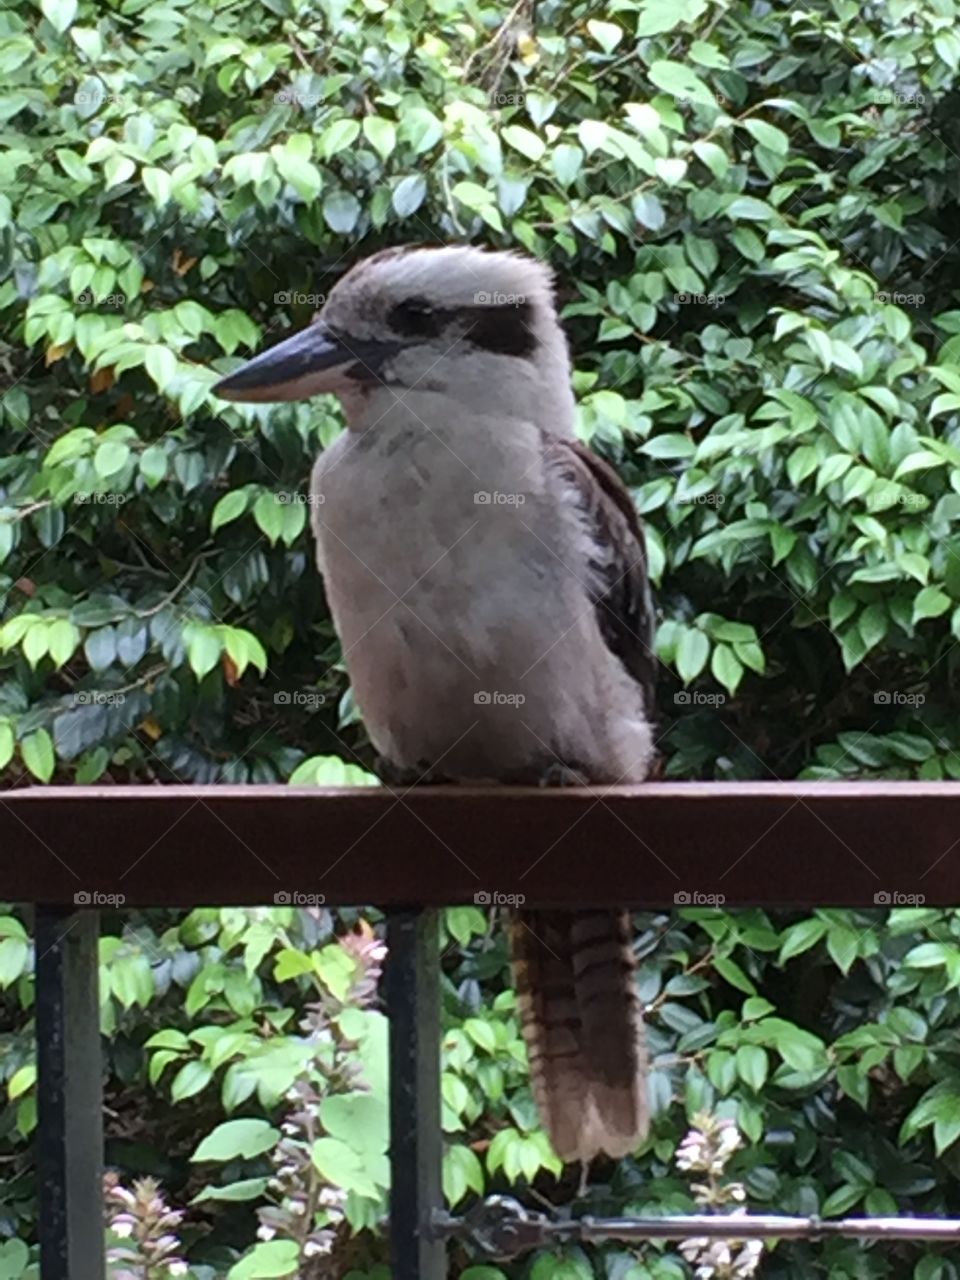 Cheeky kookaburra alights on railing, perhaps he’ll snatch something to eat. Laughing, curious, mischief!